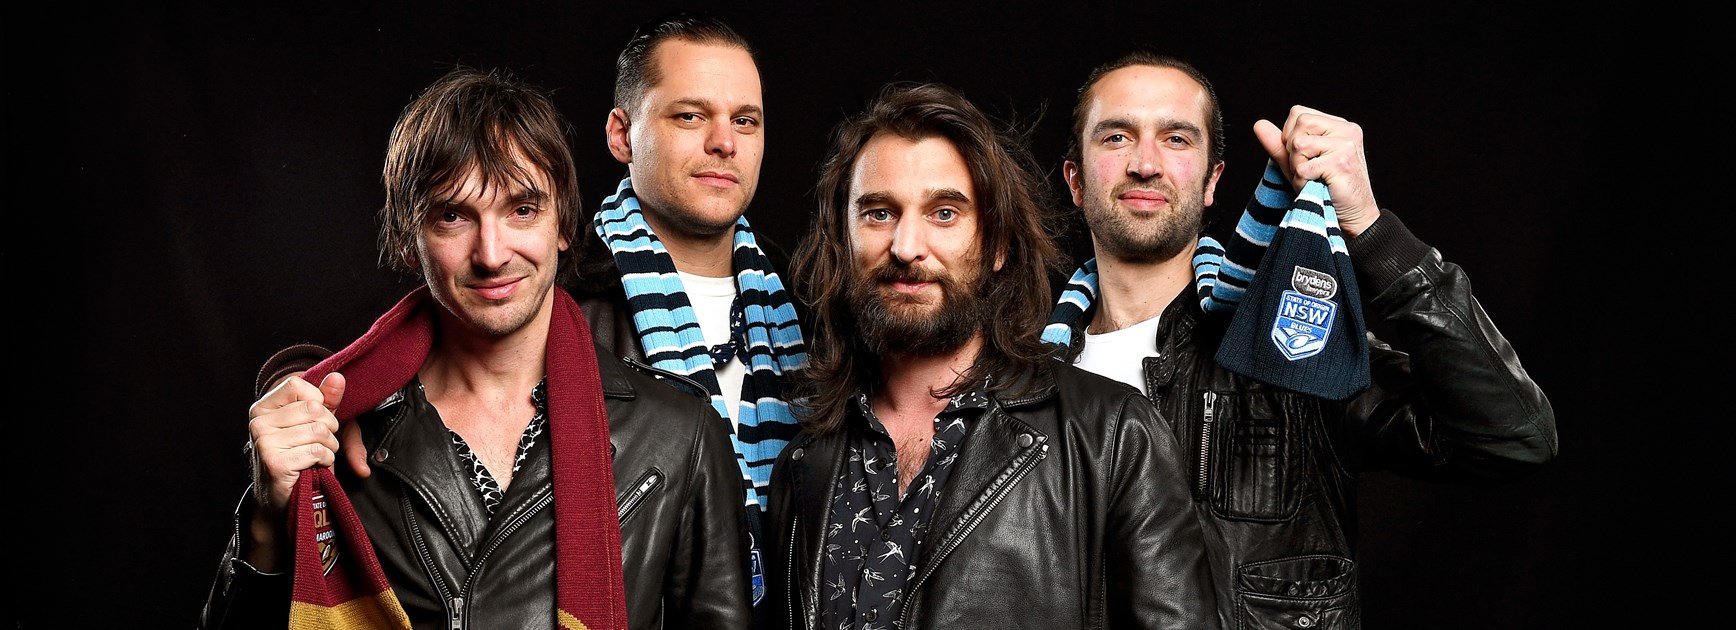 Jet to perform at State of Origin II